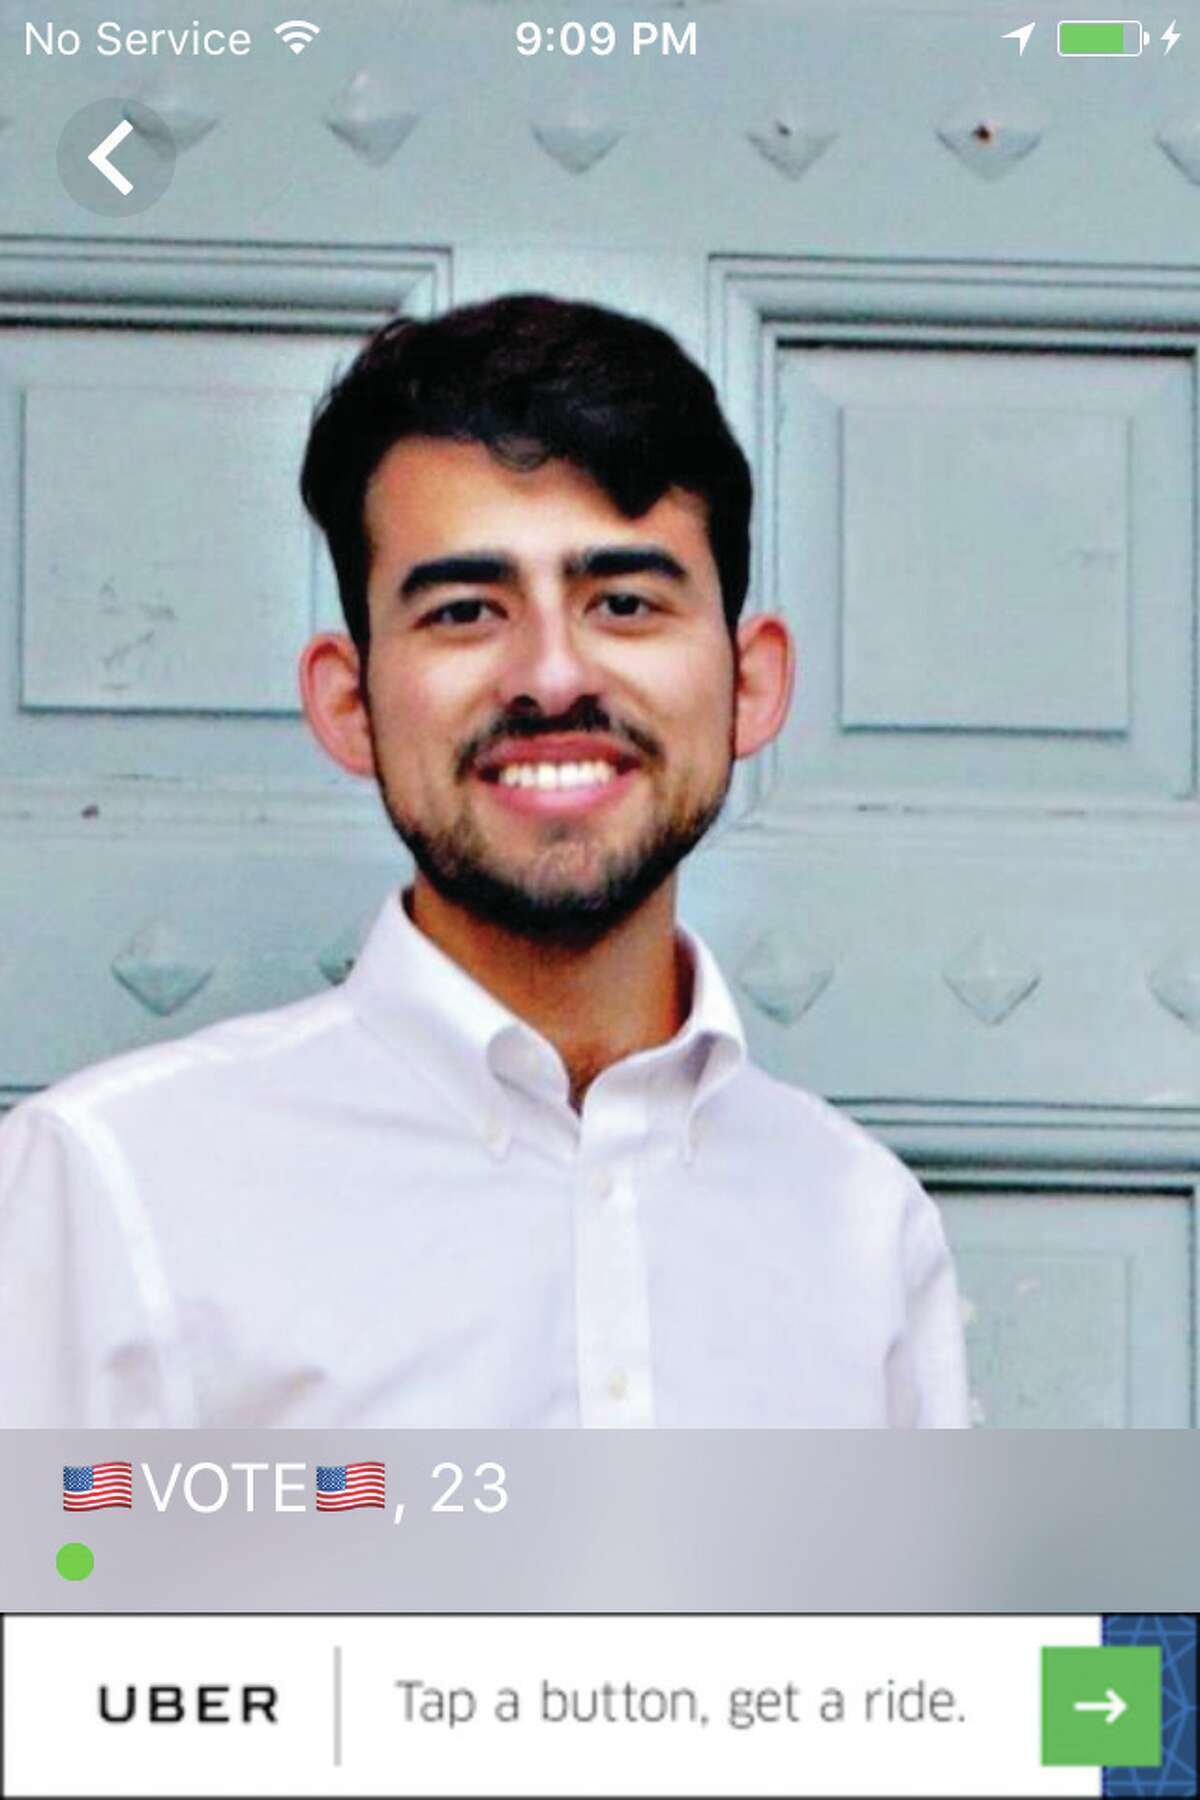 Huey Rey Fischer — a 23-year-old candidate for a Texas House seat whose district that encompasses the University of Texas at Austin — is using the mobile applications Tinder and Grindr, normally used for dating and hooking up, to reach potential supporters.